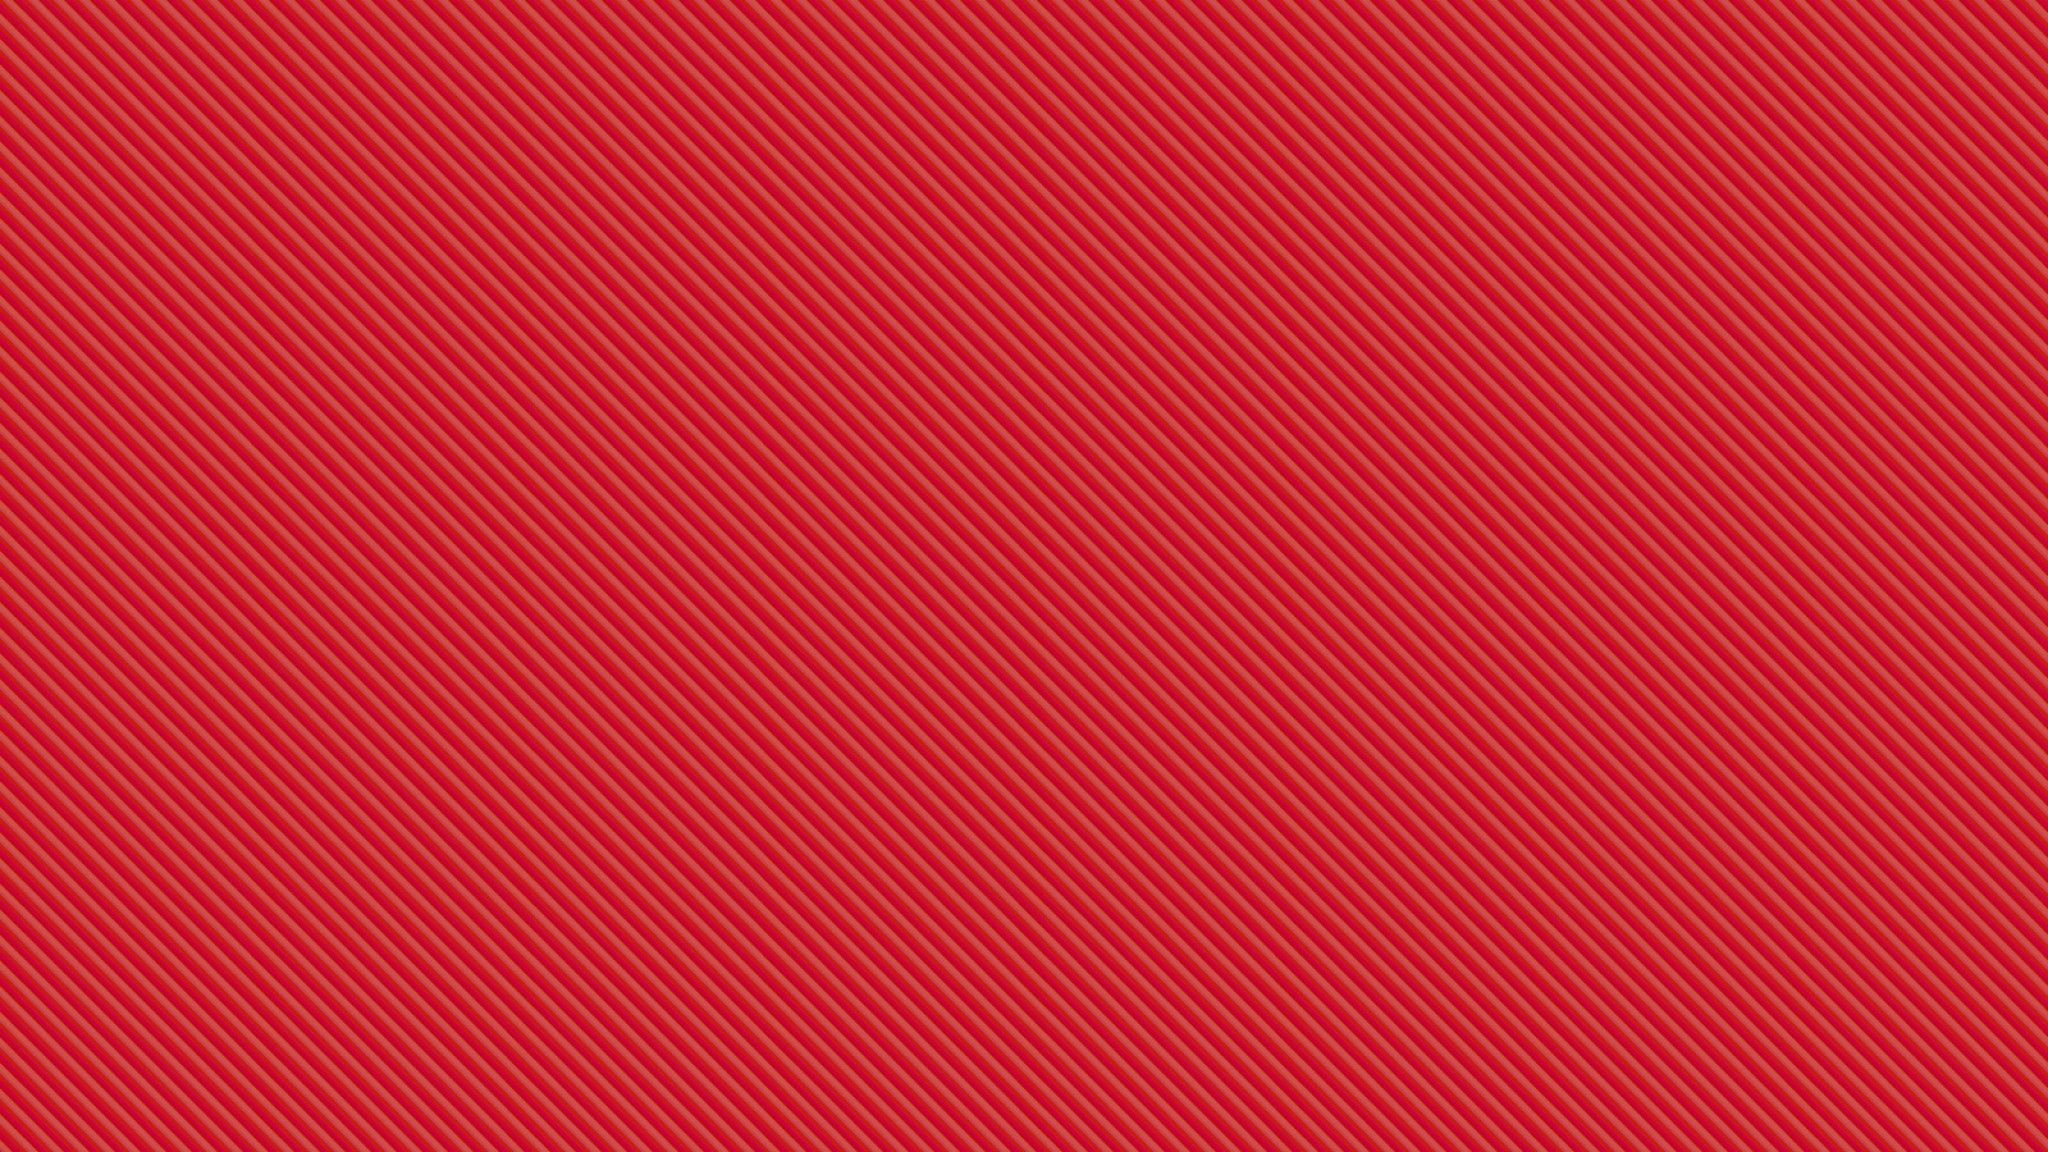 Creative and unique 2048x1152 light red background for your YouTube channel art